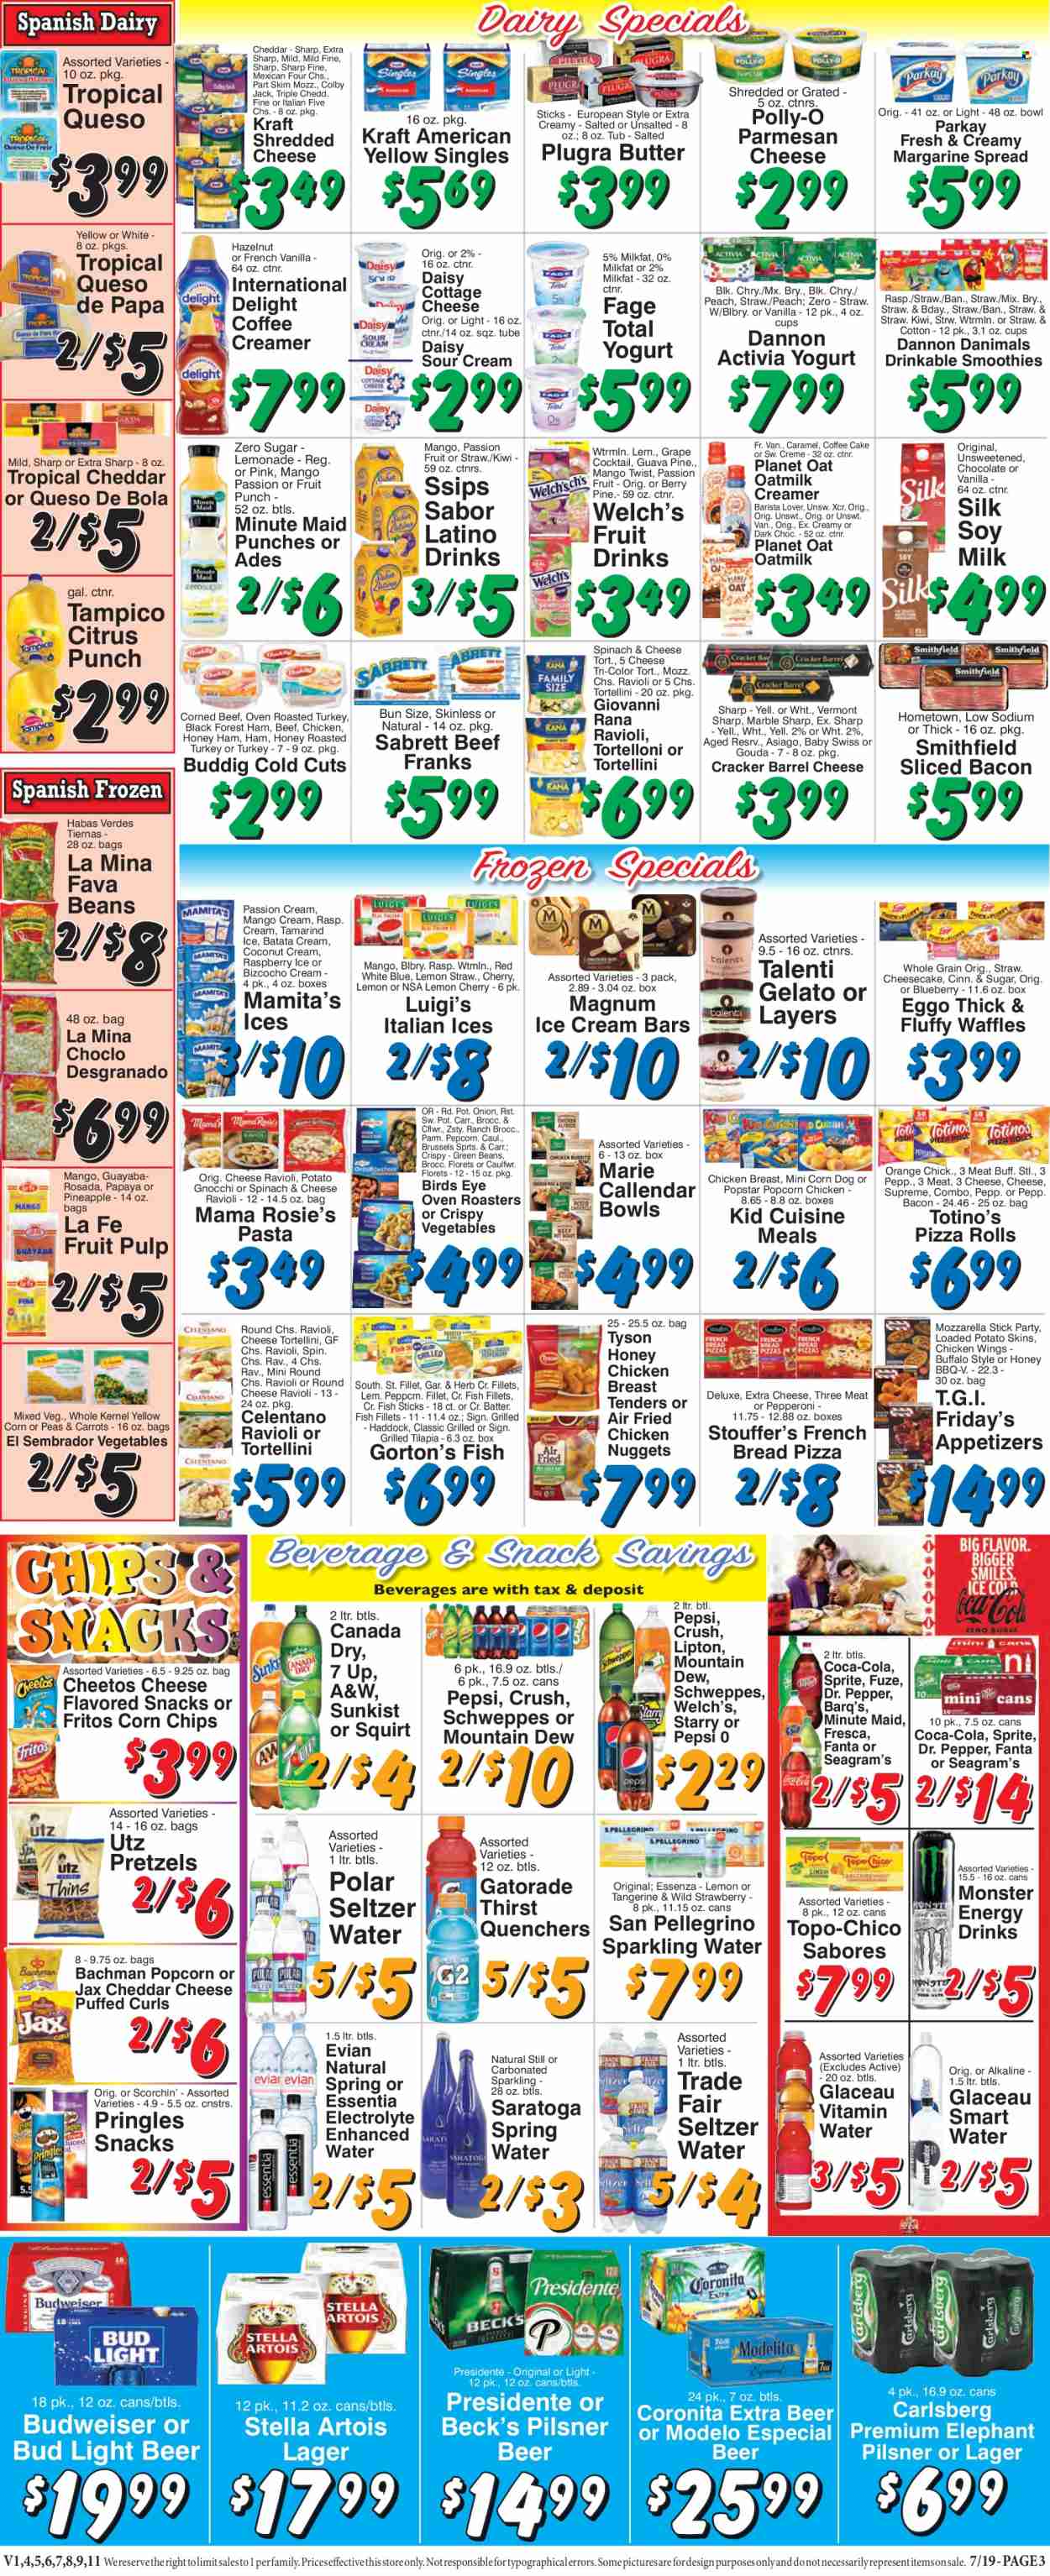 thumbnail - Trade Fair Supermarket Flyer - 07/19/2024 - 07/25/2024 - Sales products - pretzels, pizza rolls, waffles, coffee cake, carrots, fava beans, green beans, guava, mandarines, papaya, Welch's, passion fruit, fish fillets, tilapia, haddock, Gorton's, gnocchi, ravioli, pizza, chicken tenders, snack, nuggets, pasta, tortellini, fried chicken, chicken nuggets, Bird's Eye, chicken bites, Giovanni Rana, fish sticks, Kraft®, Rana, ready meal, breaded chicken, tortelloni, ham, frankfurters, corned beef, asiago, Colby cheese, cottage cheese, gouda, shredded cheese, swiss cheese, cheddar, parmesan, Activia, Dannon, Danimals, soy milk, oat milk, plant-based milk, margarine, creamer, coffee and tea creamer, ice cream, ice cream bars, Talenti Gelato, gelato, chicken wings, Stouffer's, Fritos, Pringles, Cheetos, corn chips, salty snack, tamarind, Canada Dry, Coca-Cola, ginger ale, lemonade, Mountain Dew, Schweppes, Sprite, Pepsi, Fanta, energy drink, Lipton, fruit drink, Dr. Pepper, soft drink, 7UP, Monster Energy, A&W, Gatorade, fruit punch, electrolyte drink, smoothie, seltzer water, spring water, sparkling water, Smartwater, Evian, San Pellegrino, vitamin water, water, carbonated soft drink, beer, Budweiser, Stella Artois, Bud Light, Carlsberg, Beck's, Lager, Modelo. Page 3.